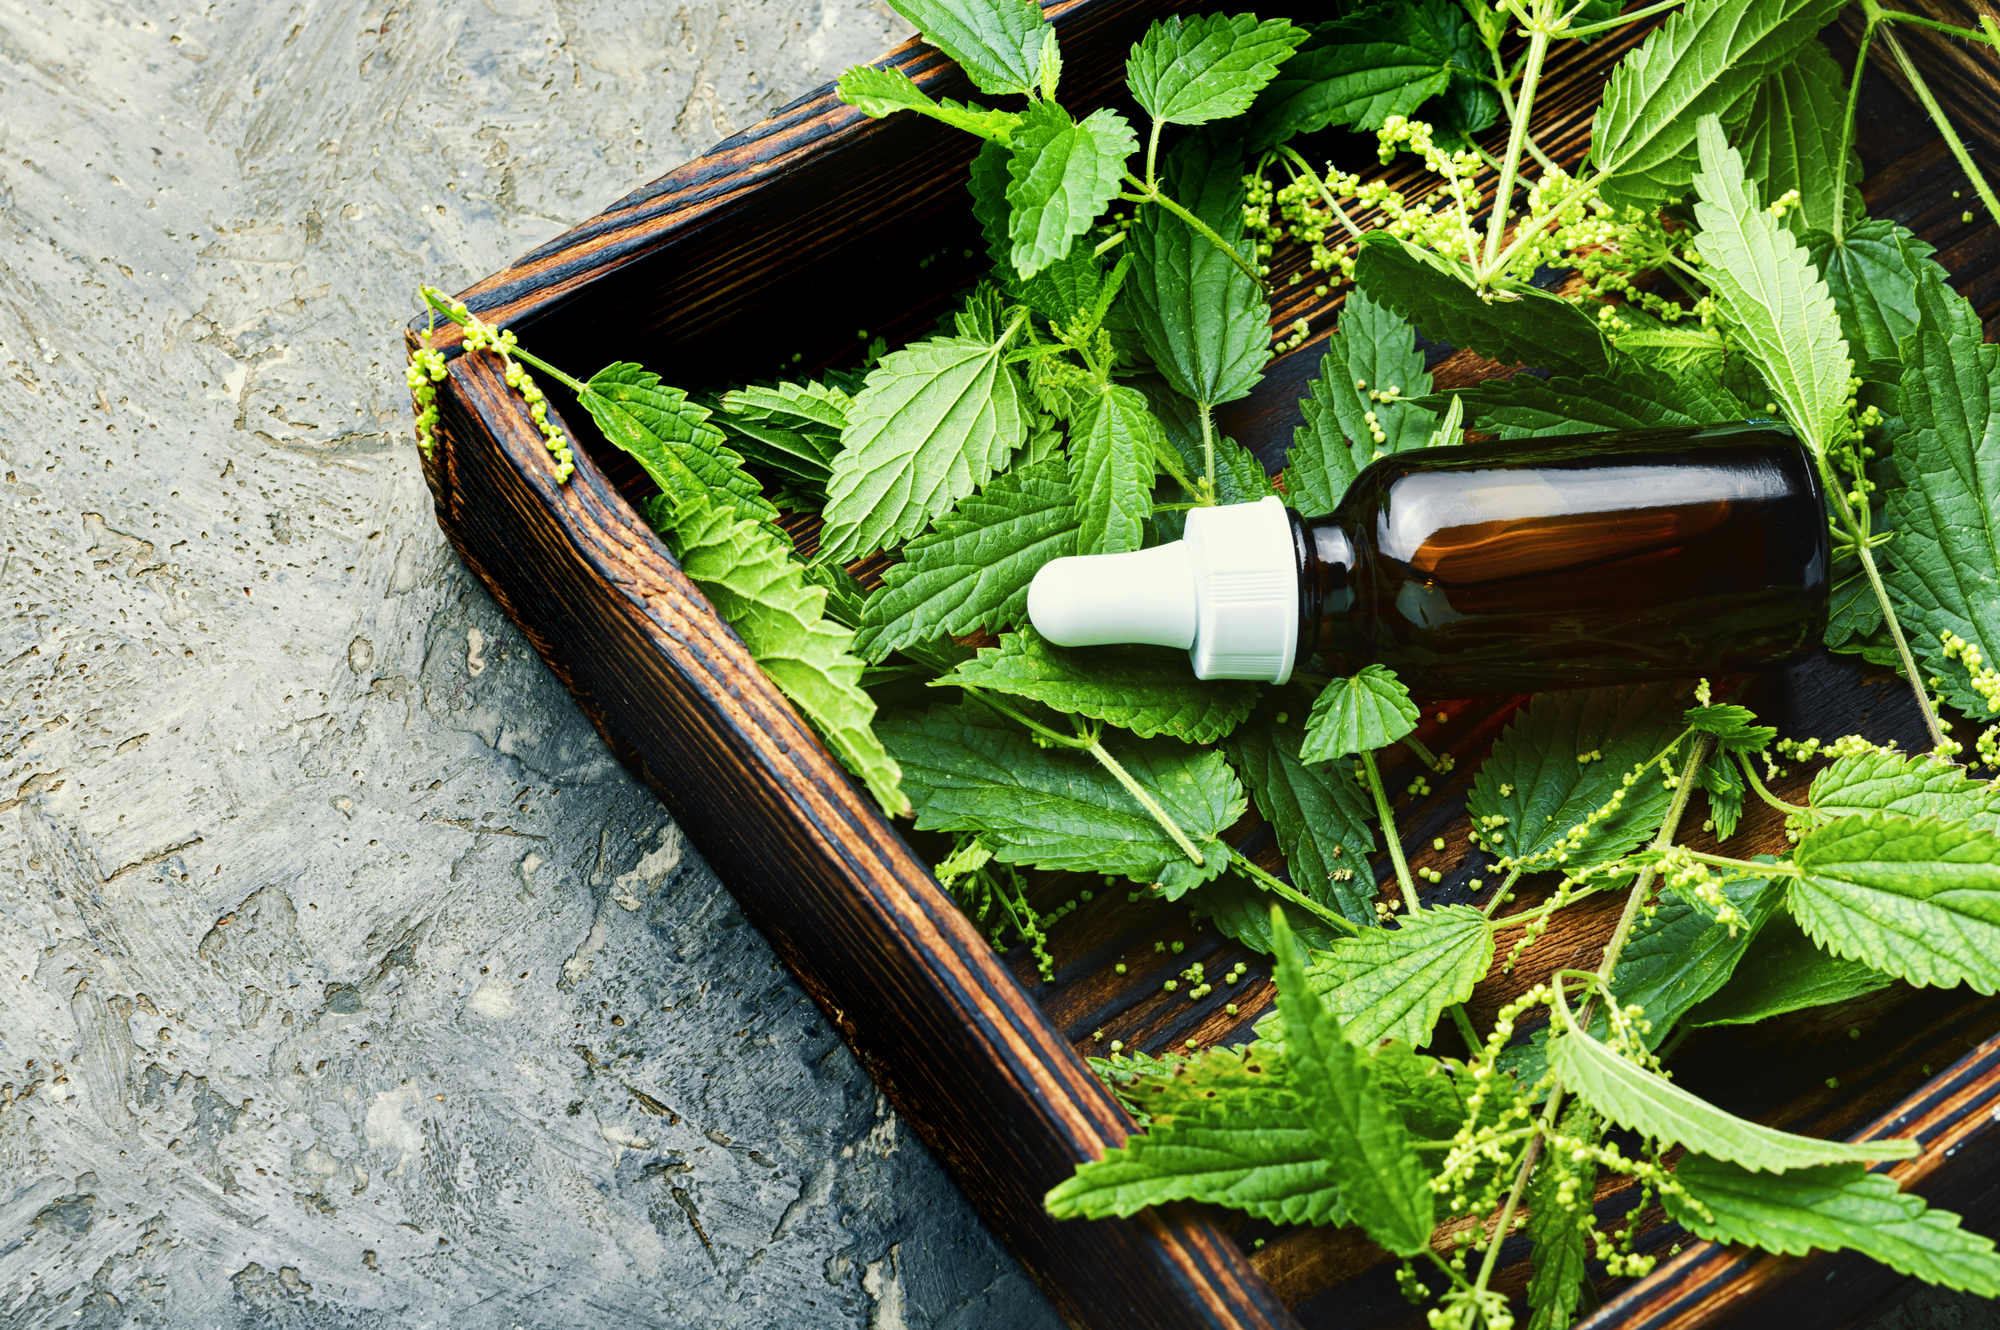 Nettle Tea: 4 Health Benefits, How to Make Your Own, and a Warning